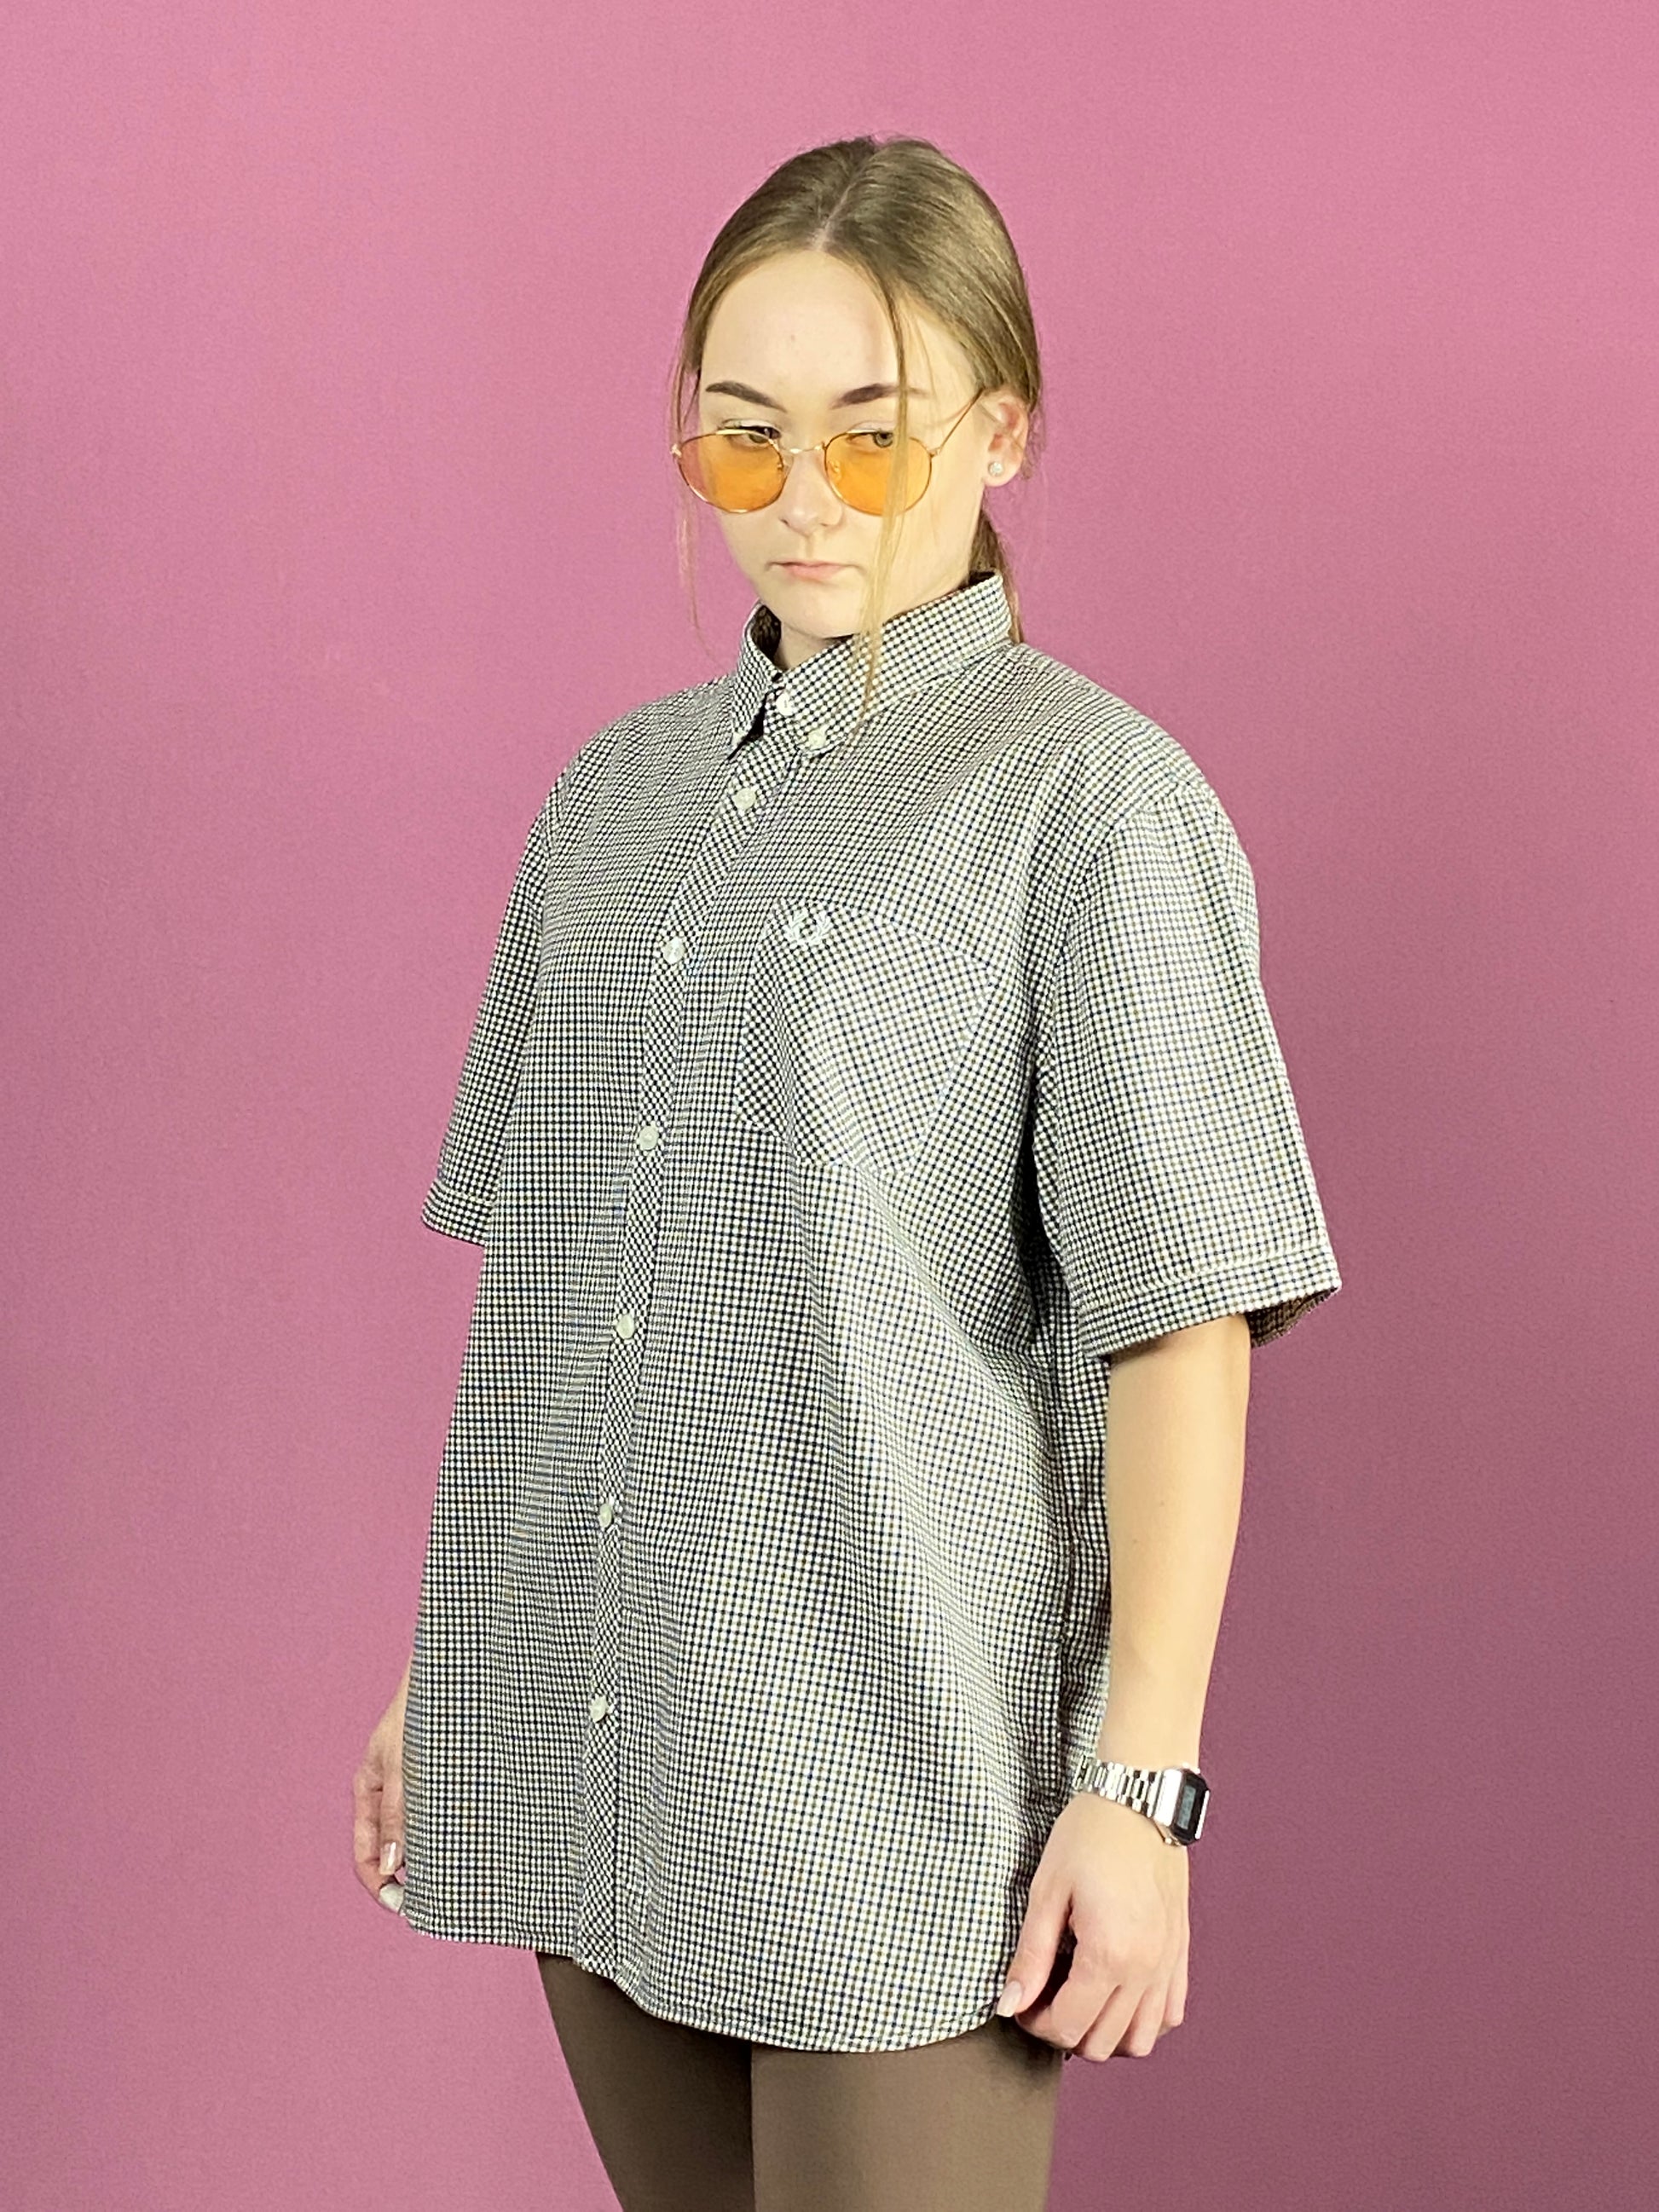 Fred Perry Vintage Women's Short Sleeve Shirt